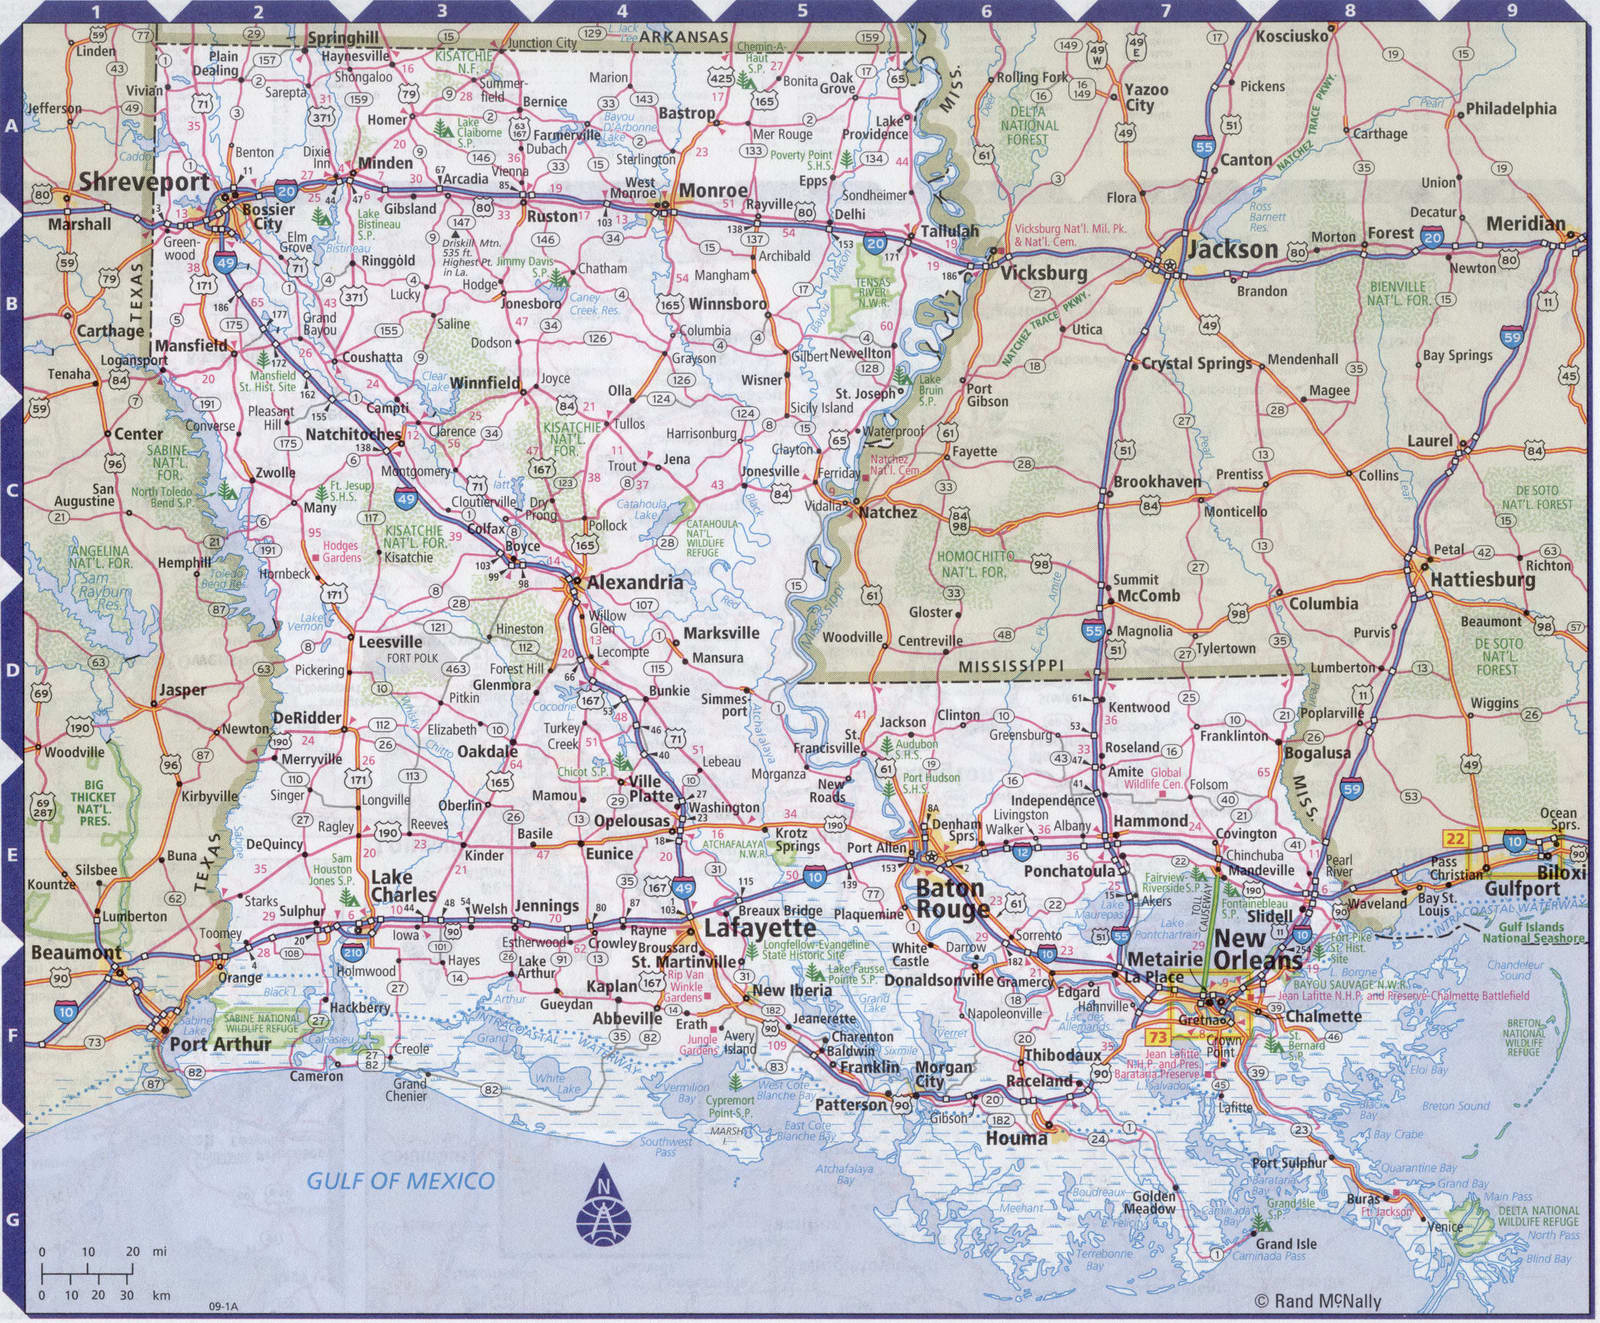 Louisiana state complete map